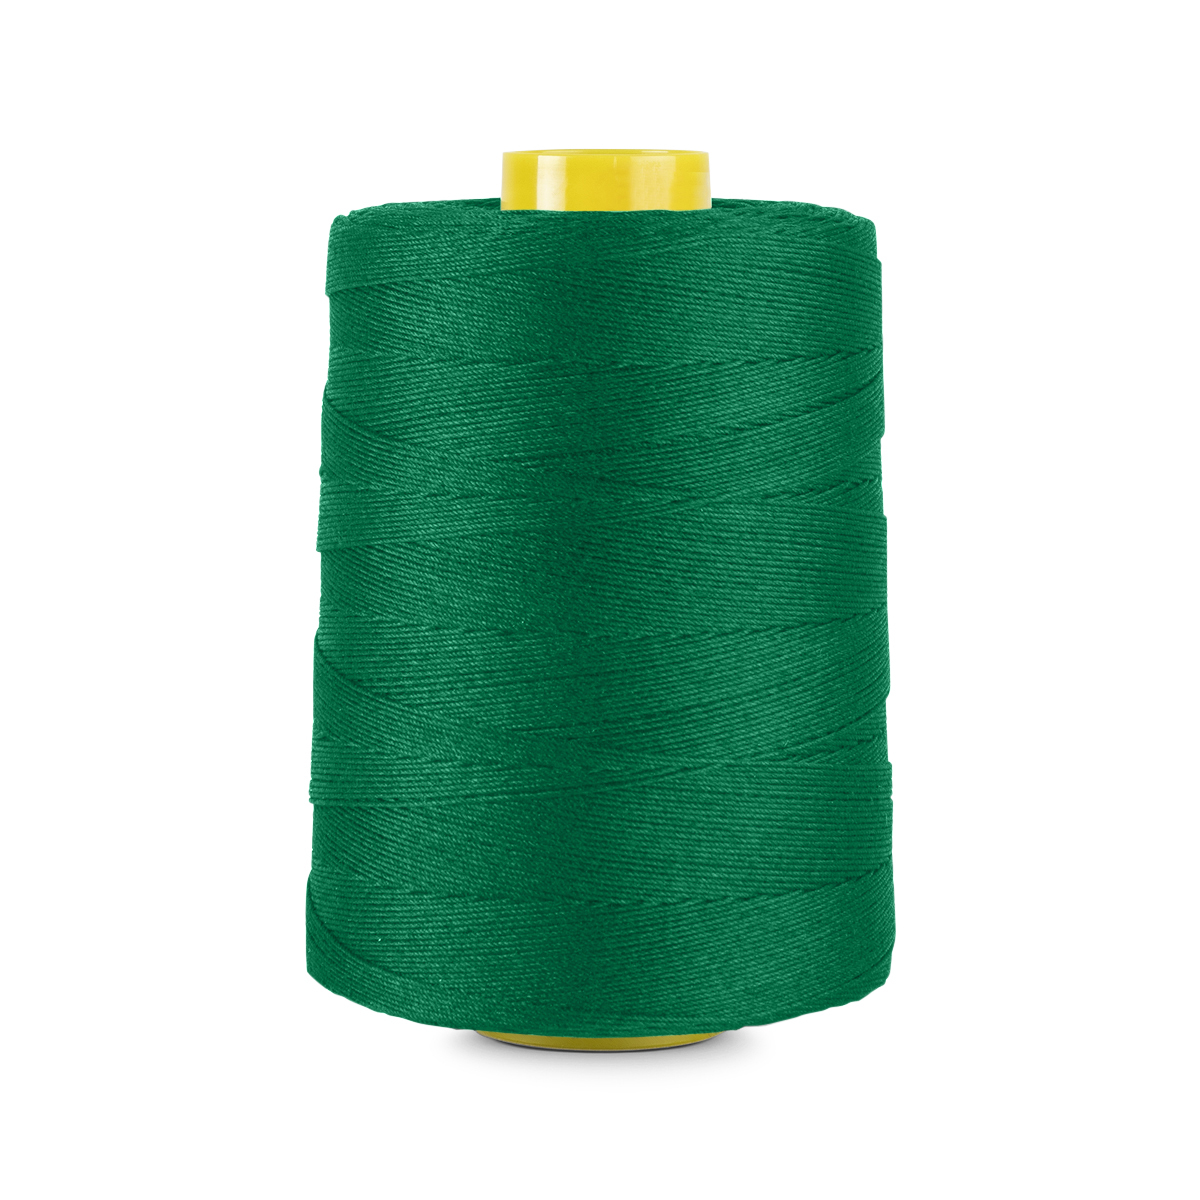 UL511 - Ultima™ 40wt Cotton Wrapped Polyester Emerald Green Thread